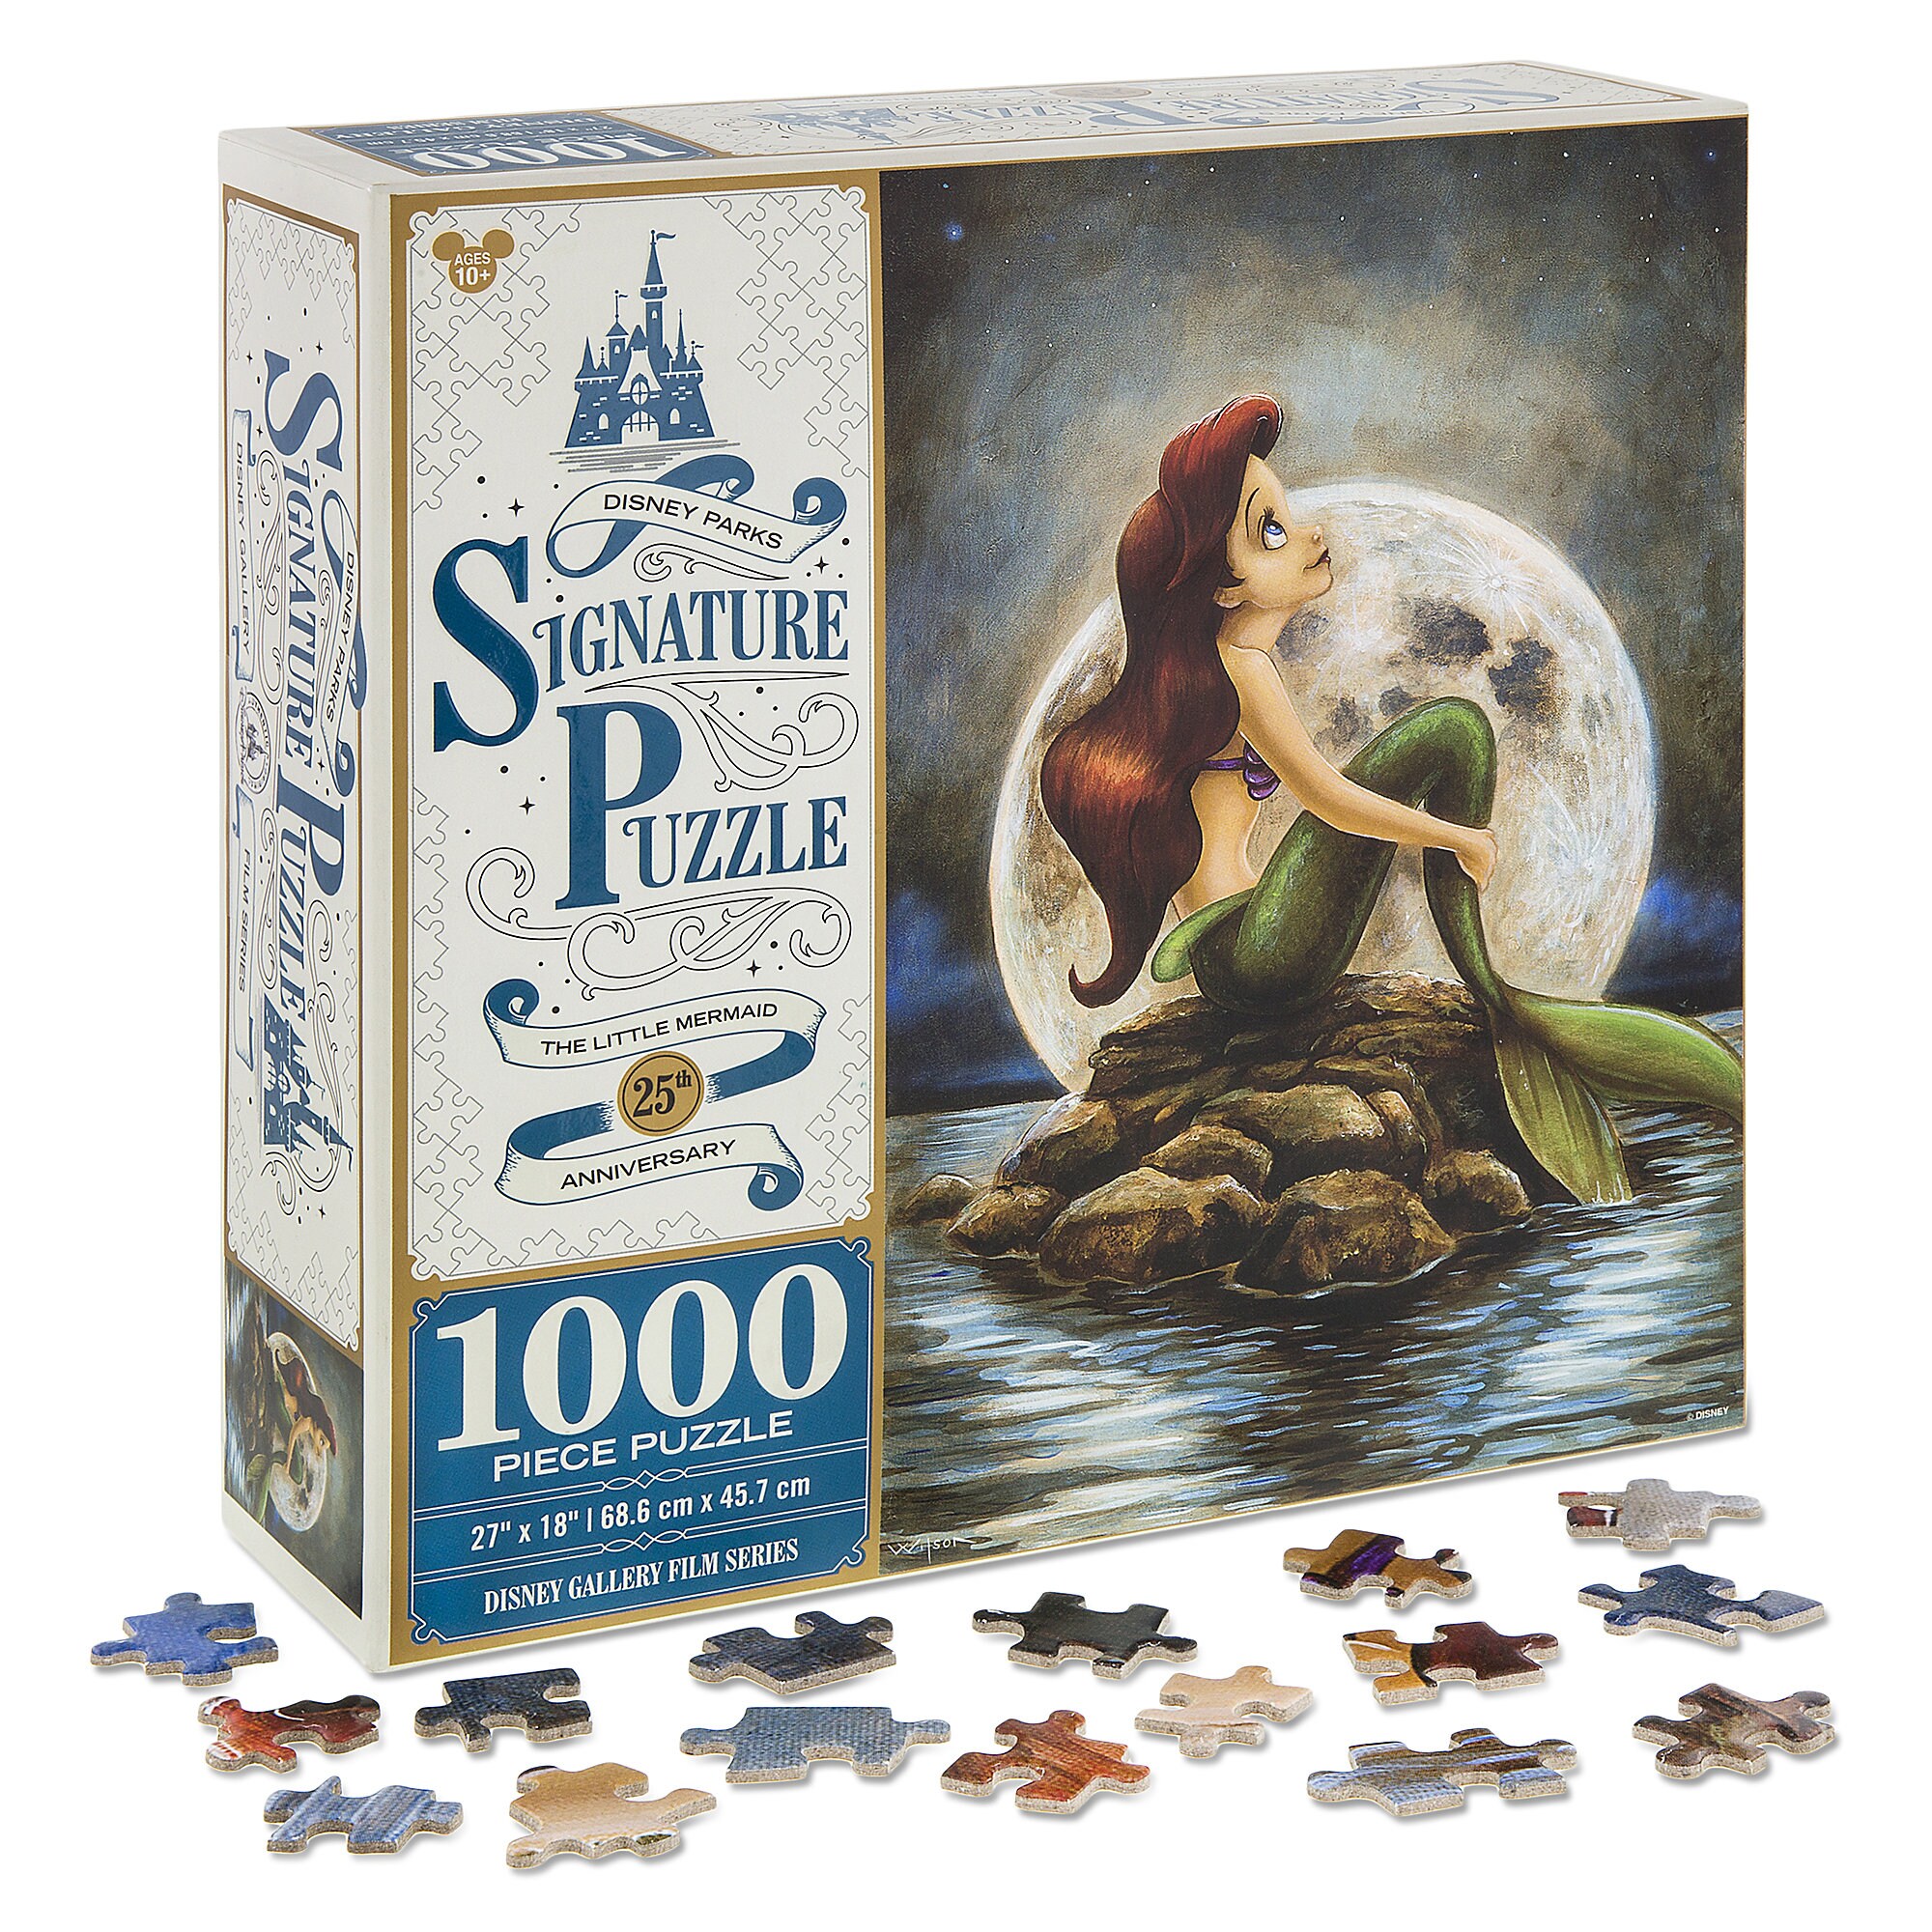 The Little Mermaid 25th Anniversary Jigsaw Puzzle